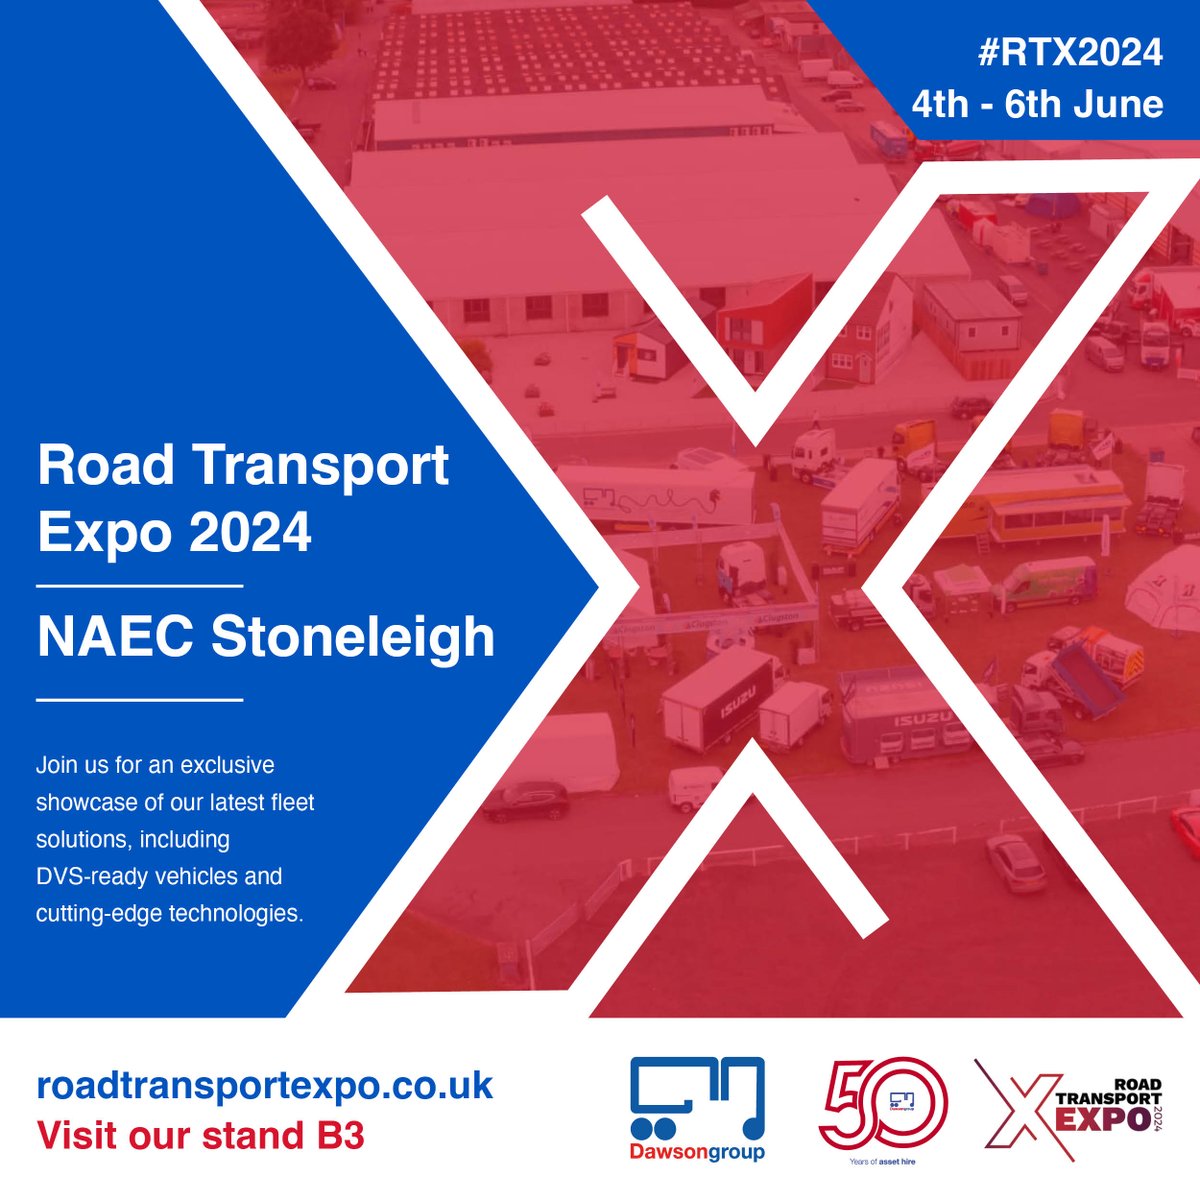 🚛 Exciting news! Dawsongroup will be exhibiting at the Road Transport Expo (RTX) held at NAEC Stoneleigh from 4th to 6th June. 

Visit us at stand B3 to explore how we can help your business with our extensive range of vehicles.

dgtt.co.uk/what-we-do/roa… 

#FleetExpo #TruckShow